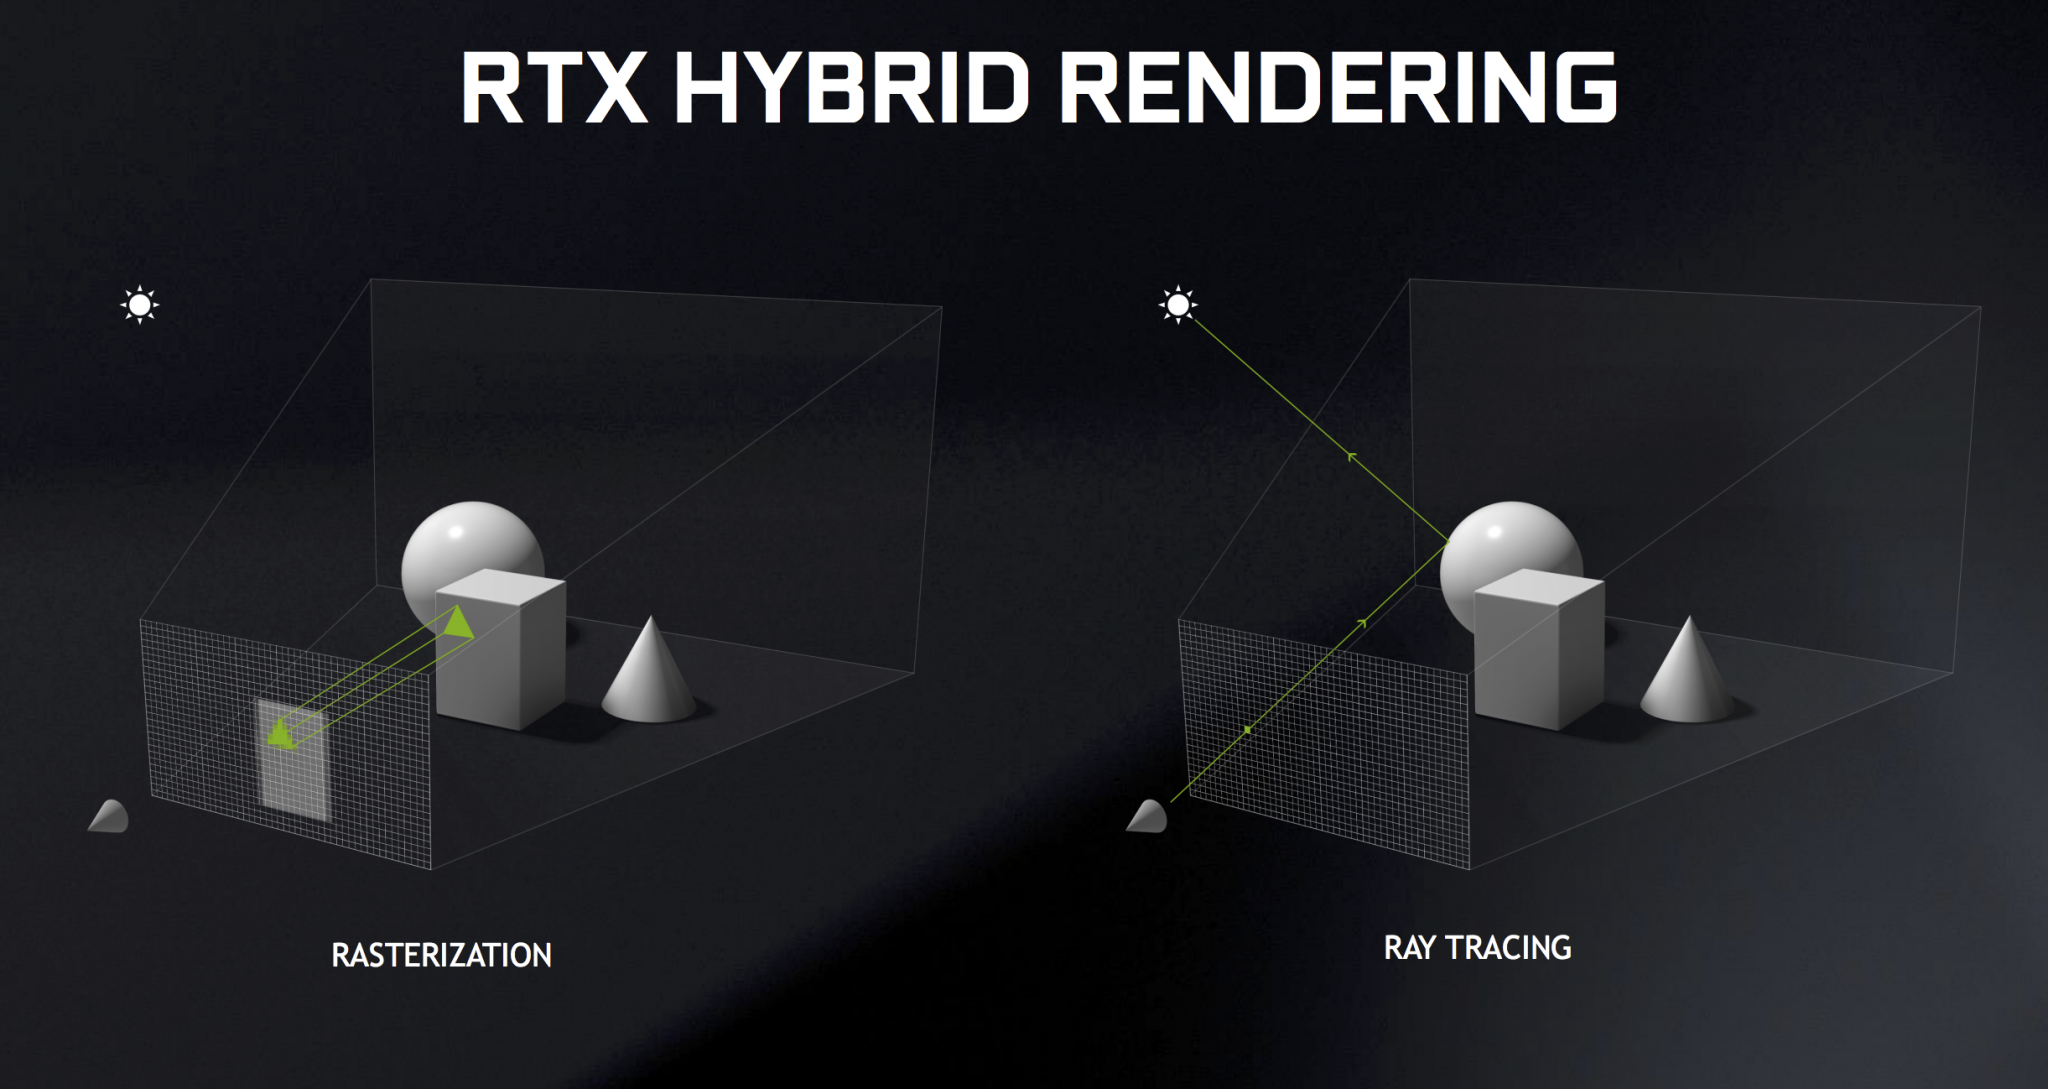 NVIDIA’s Real-Time Ray Tracing and AI-powered RTX Technology Explained